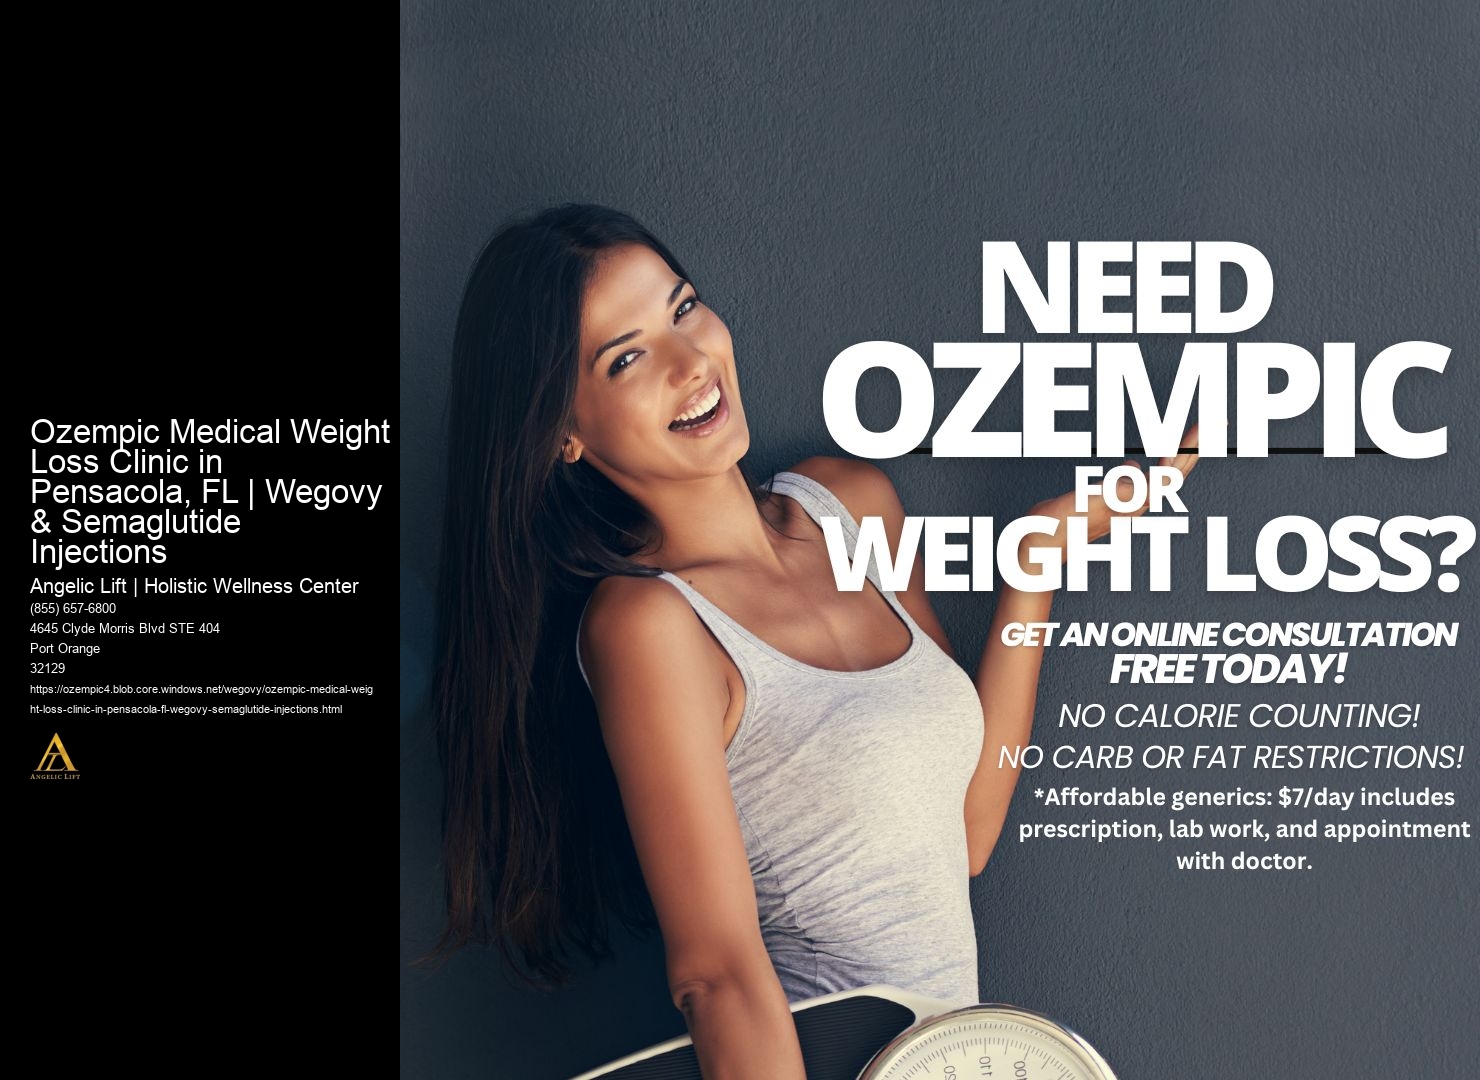 Ozempic Medical Weight Loss Clinic in Pensacola, FL | Wegovy & Semaglutide Injections